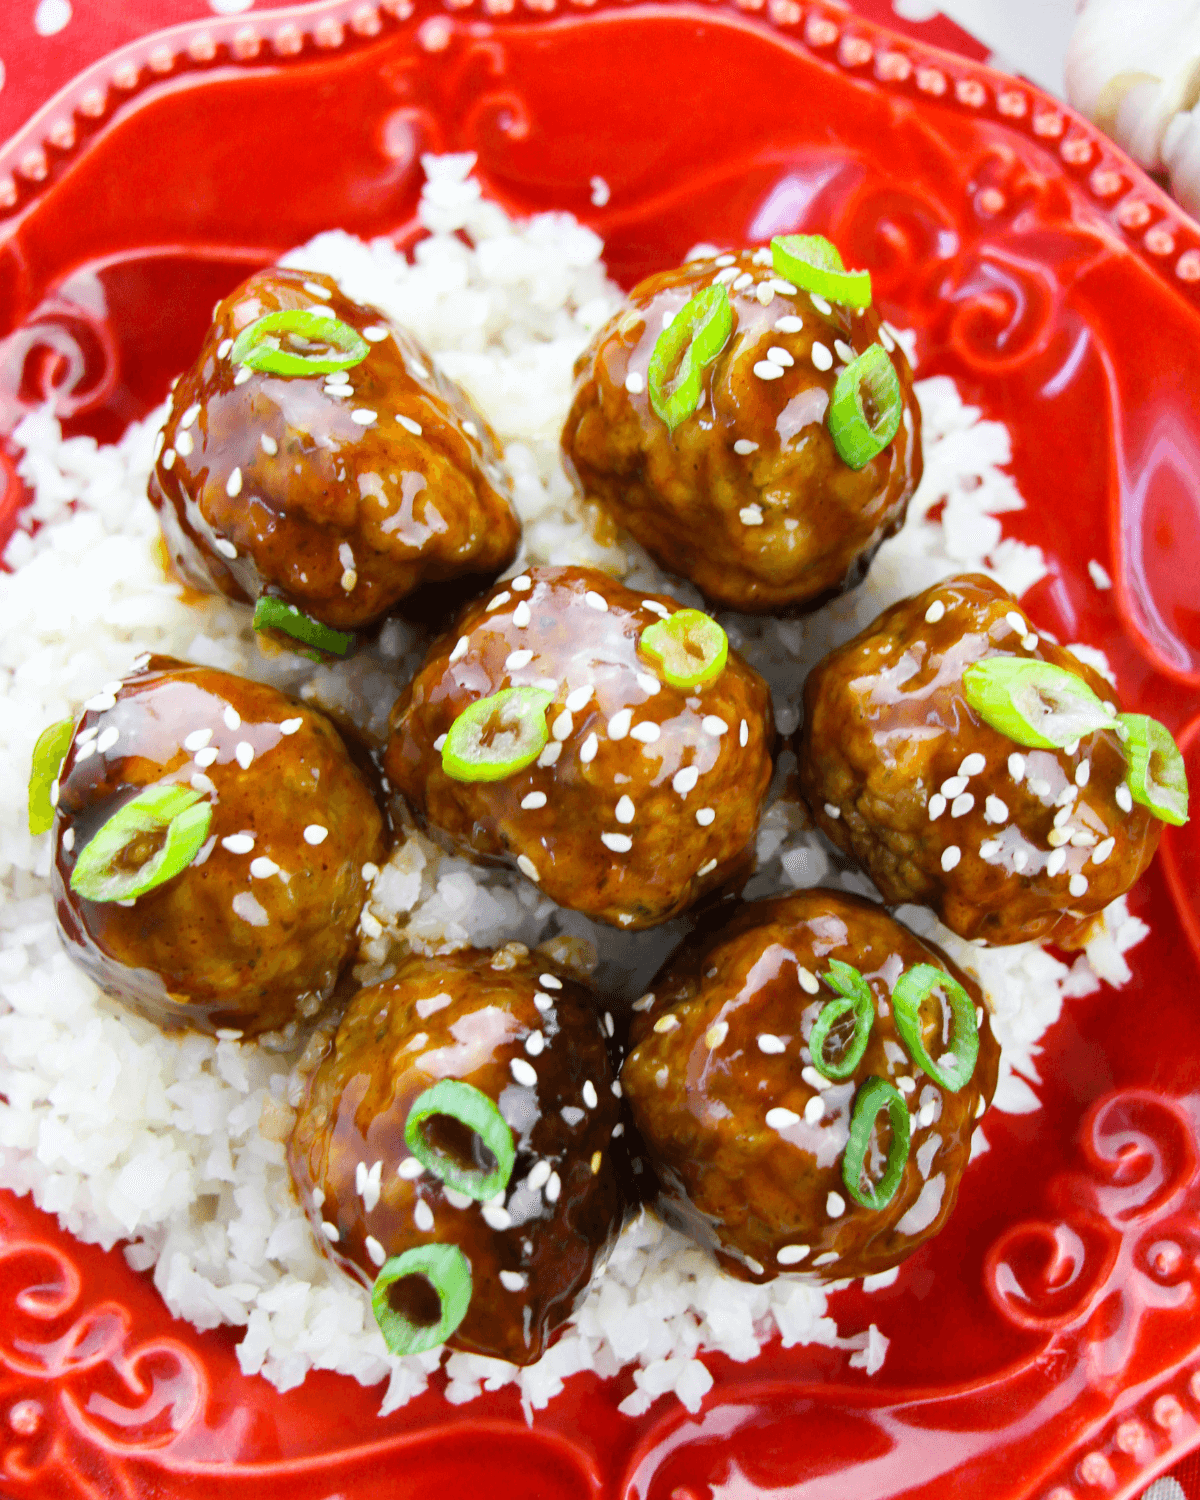 Glazed Honey Garlic Meatballs over rice garnished with sesame seeds and sliced green onions on a red plate.